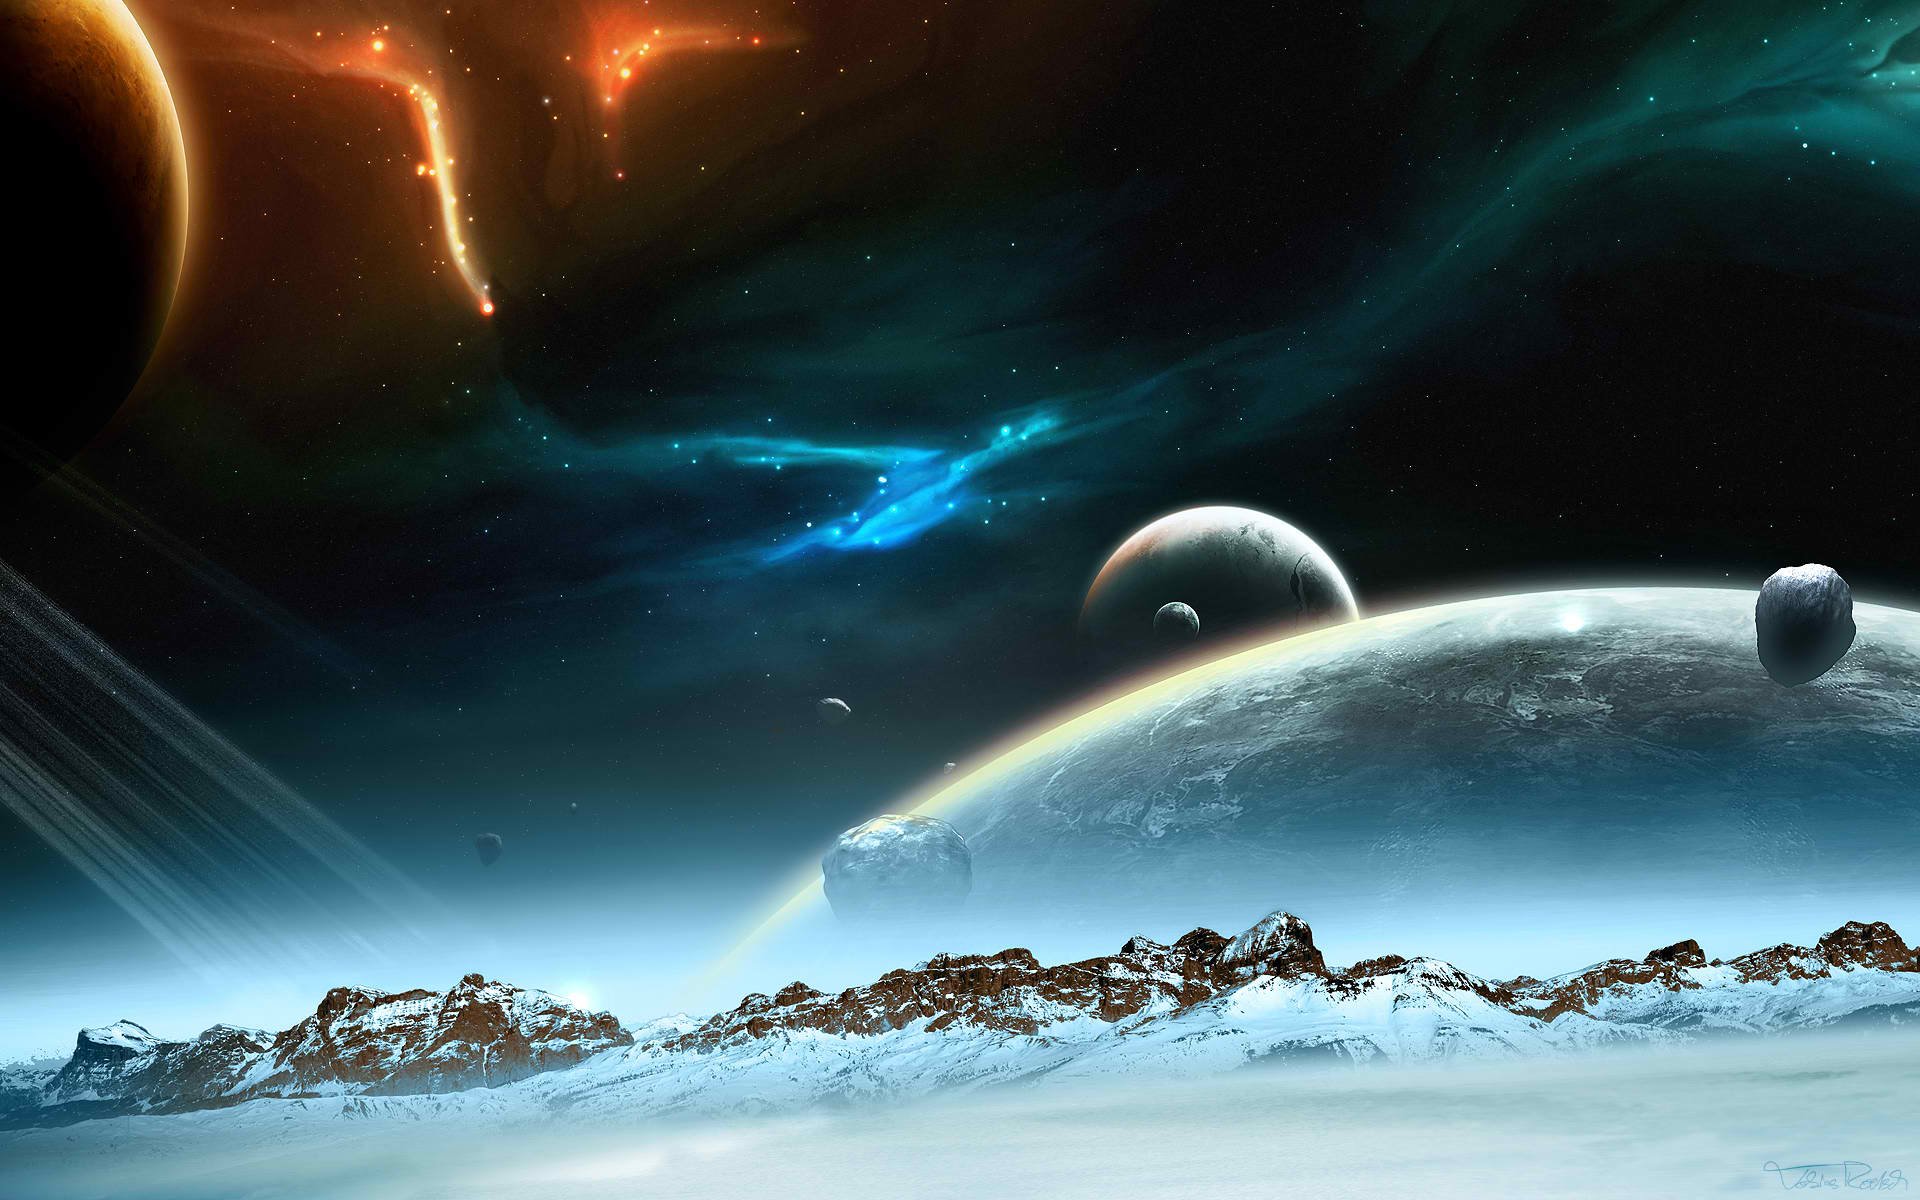 outer, Space, Planets, Arctic, Digital, Art Wallpaper